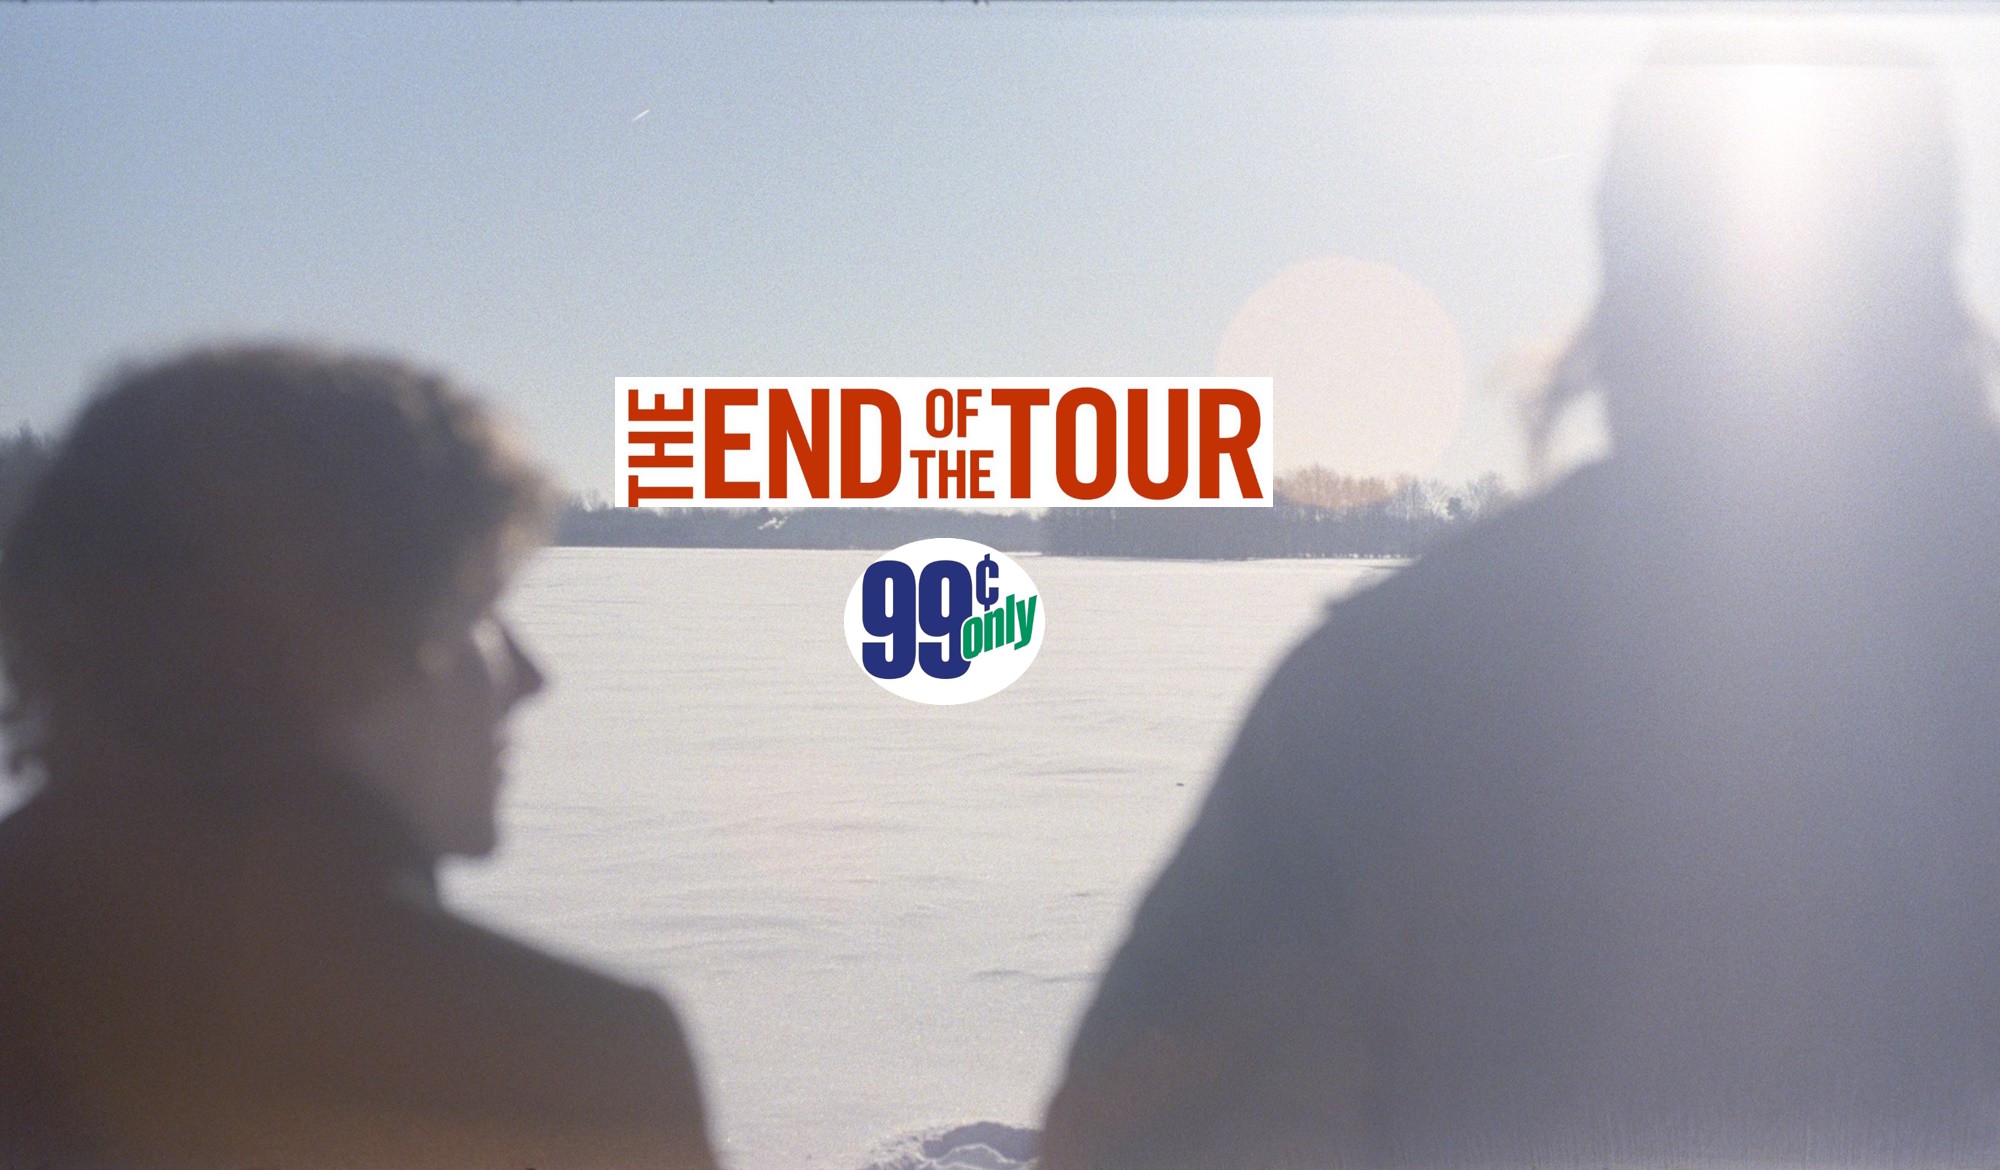 Itunes 99 cent rental, the end of the tour, david foster wallace